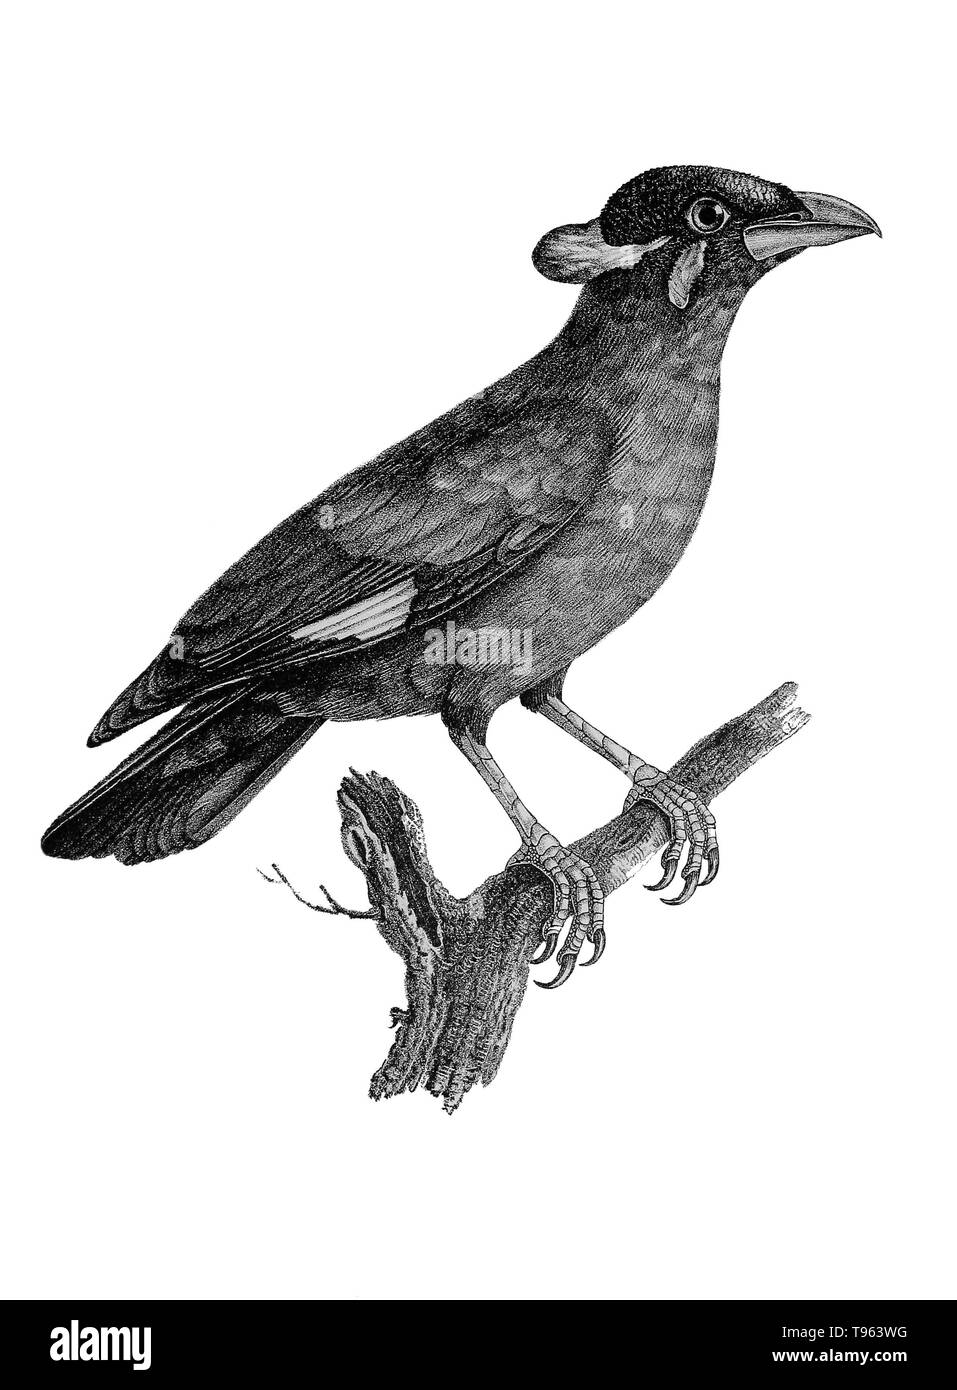 The common hill mynah (Gracula religiosa) from La galerie des oiseaux du Cabinet d'histoire naturelle du Jardin du roi, 1834 edition, written by Louis Pierre Vieillot, with plates by Paul Louis Oudart. The mynah, native to India, is a popular pet for its vocal abilities. Stock Photo